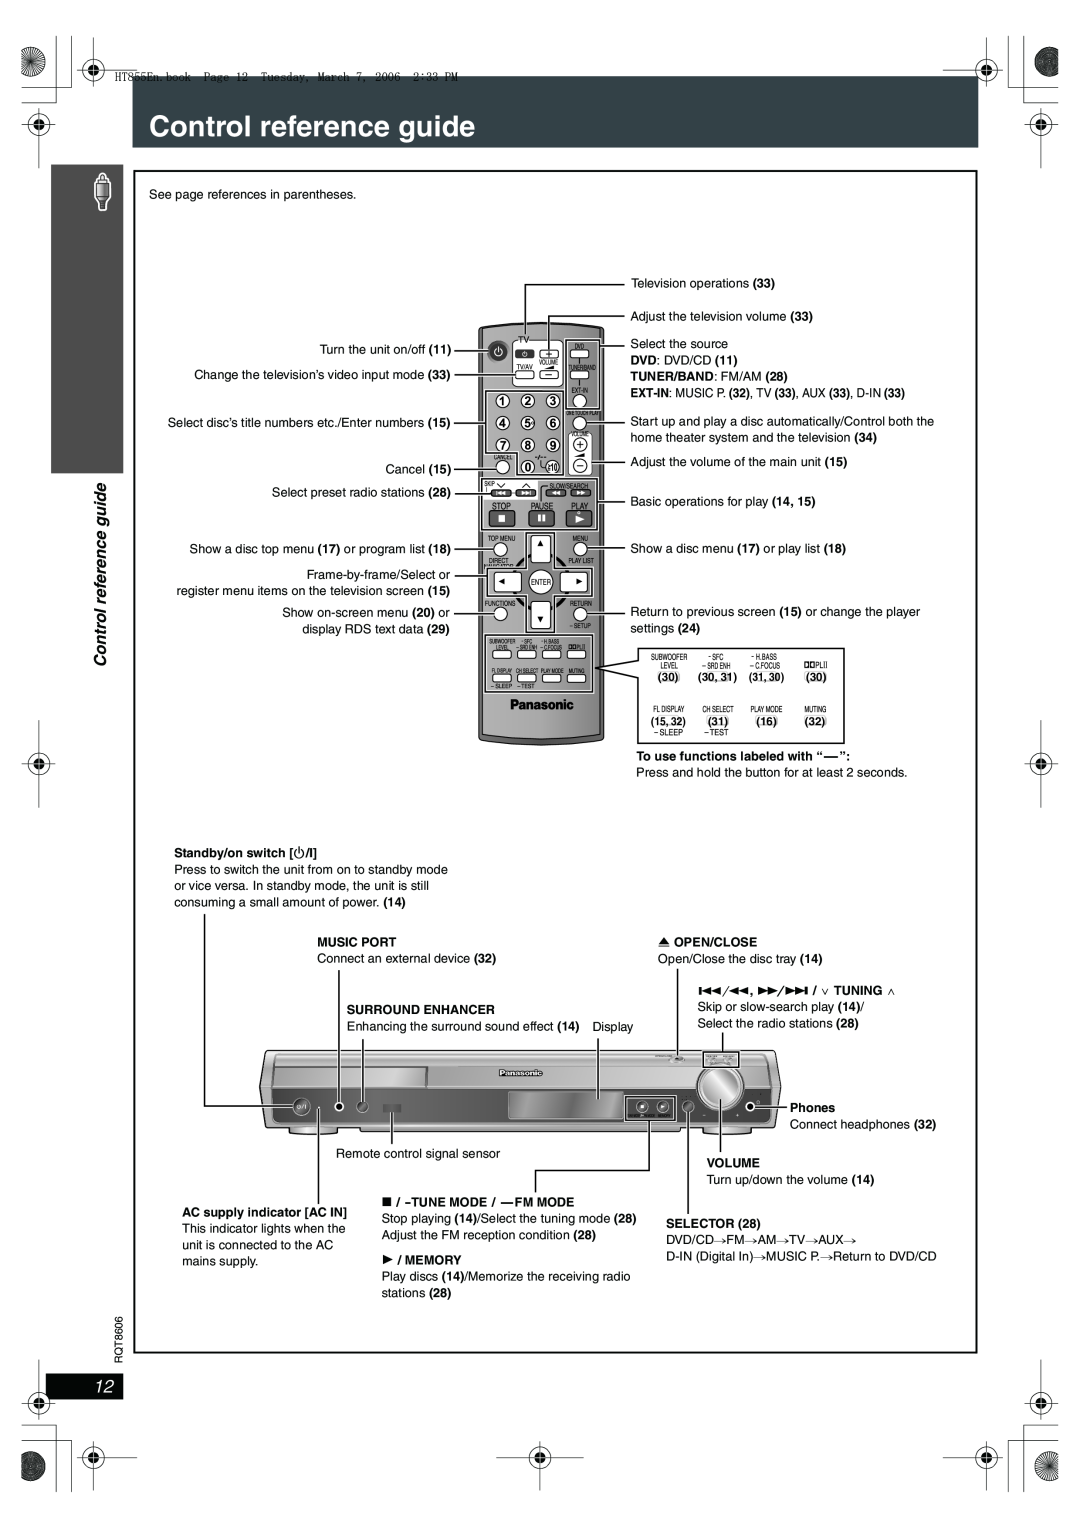 Panasonic SC-HT855 manual Control reference guide 